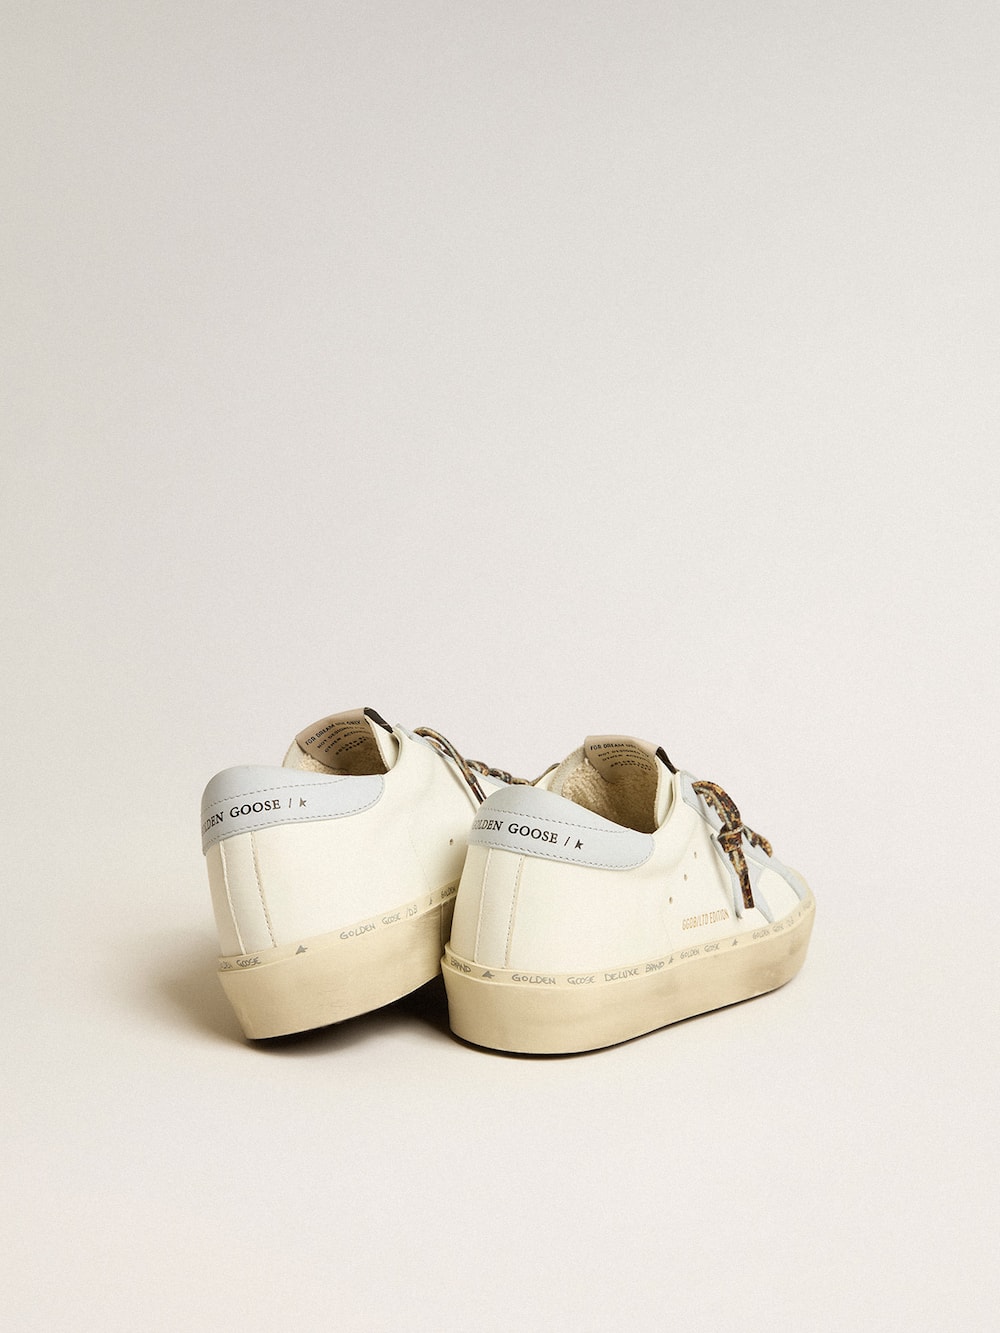 Golden Goose - Hi Star LTD in leather with light blue leather star and heel tab in 